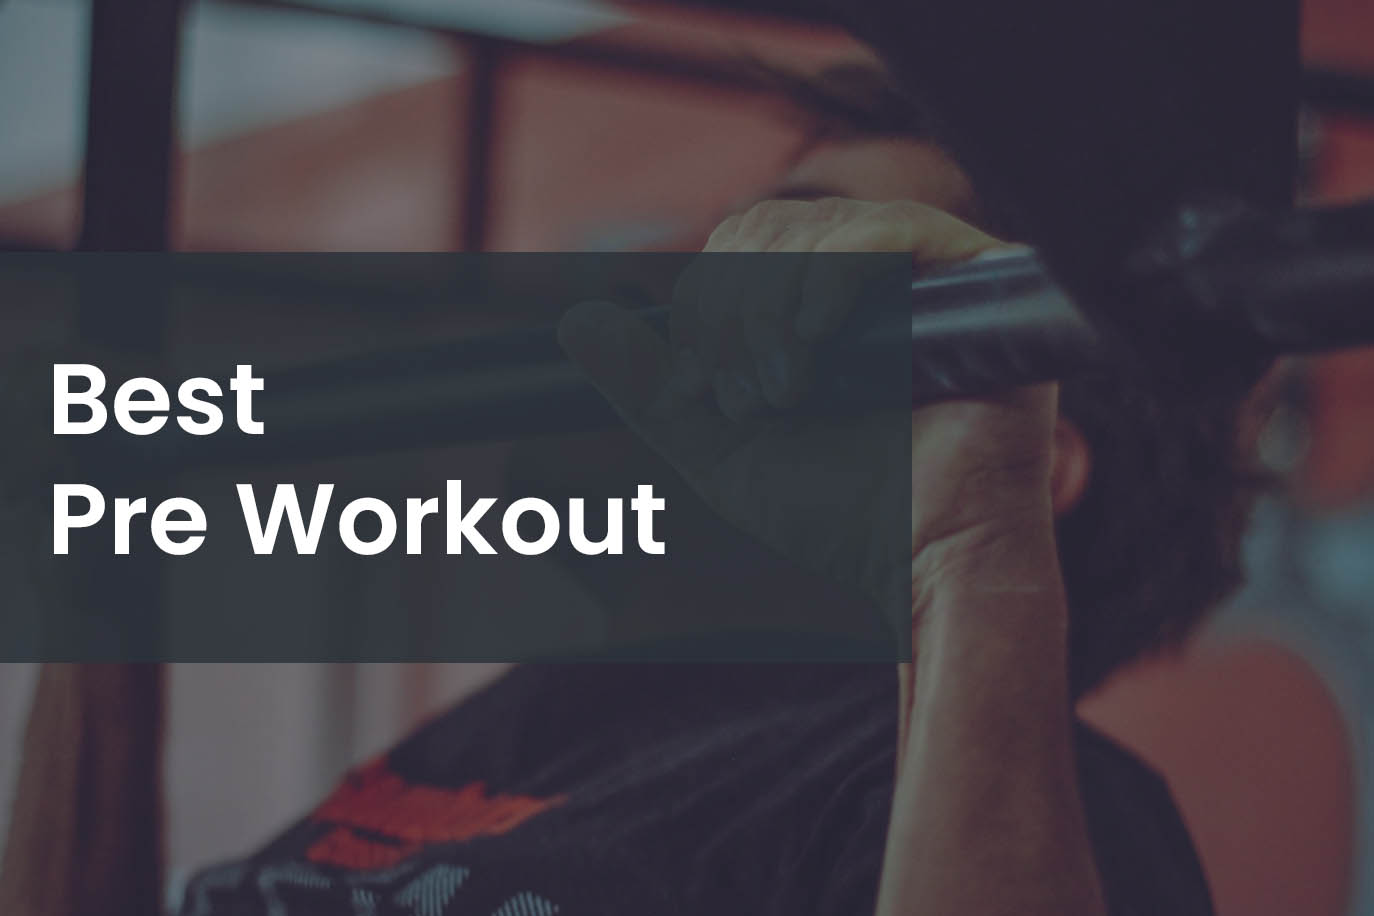 15 Minute Best Pre Workout 2021 Uk for Build Muscle